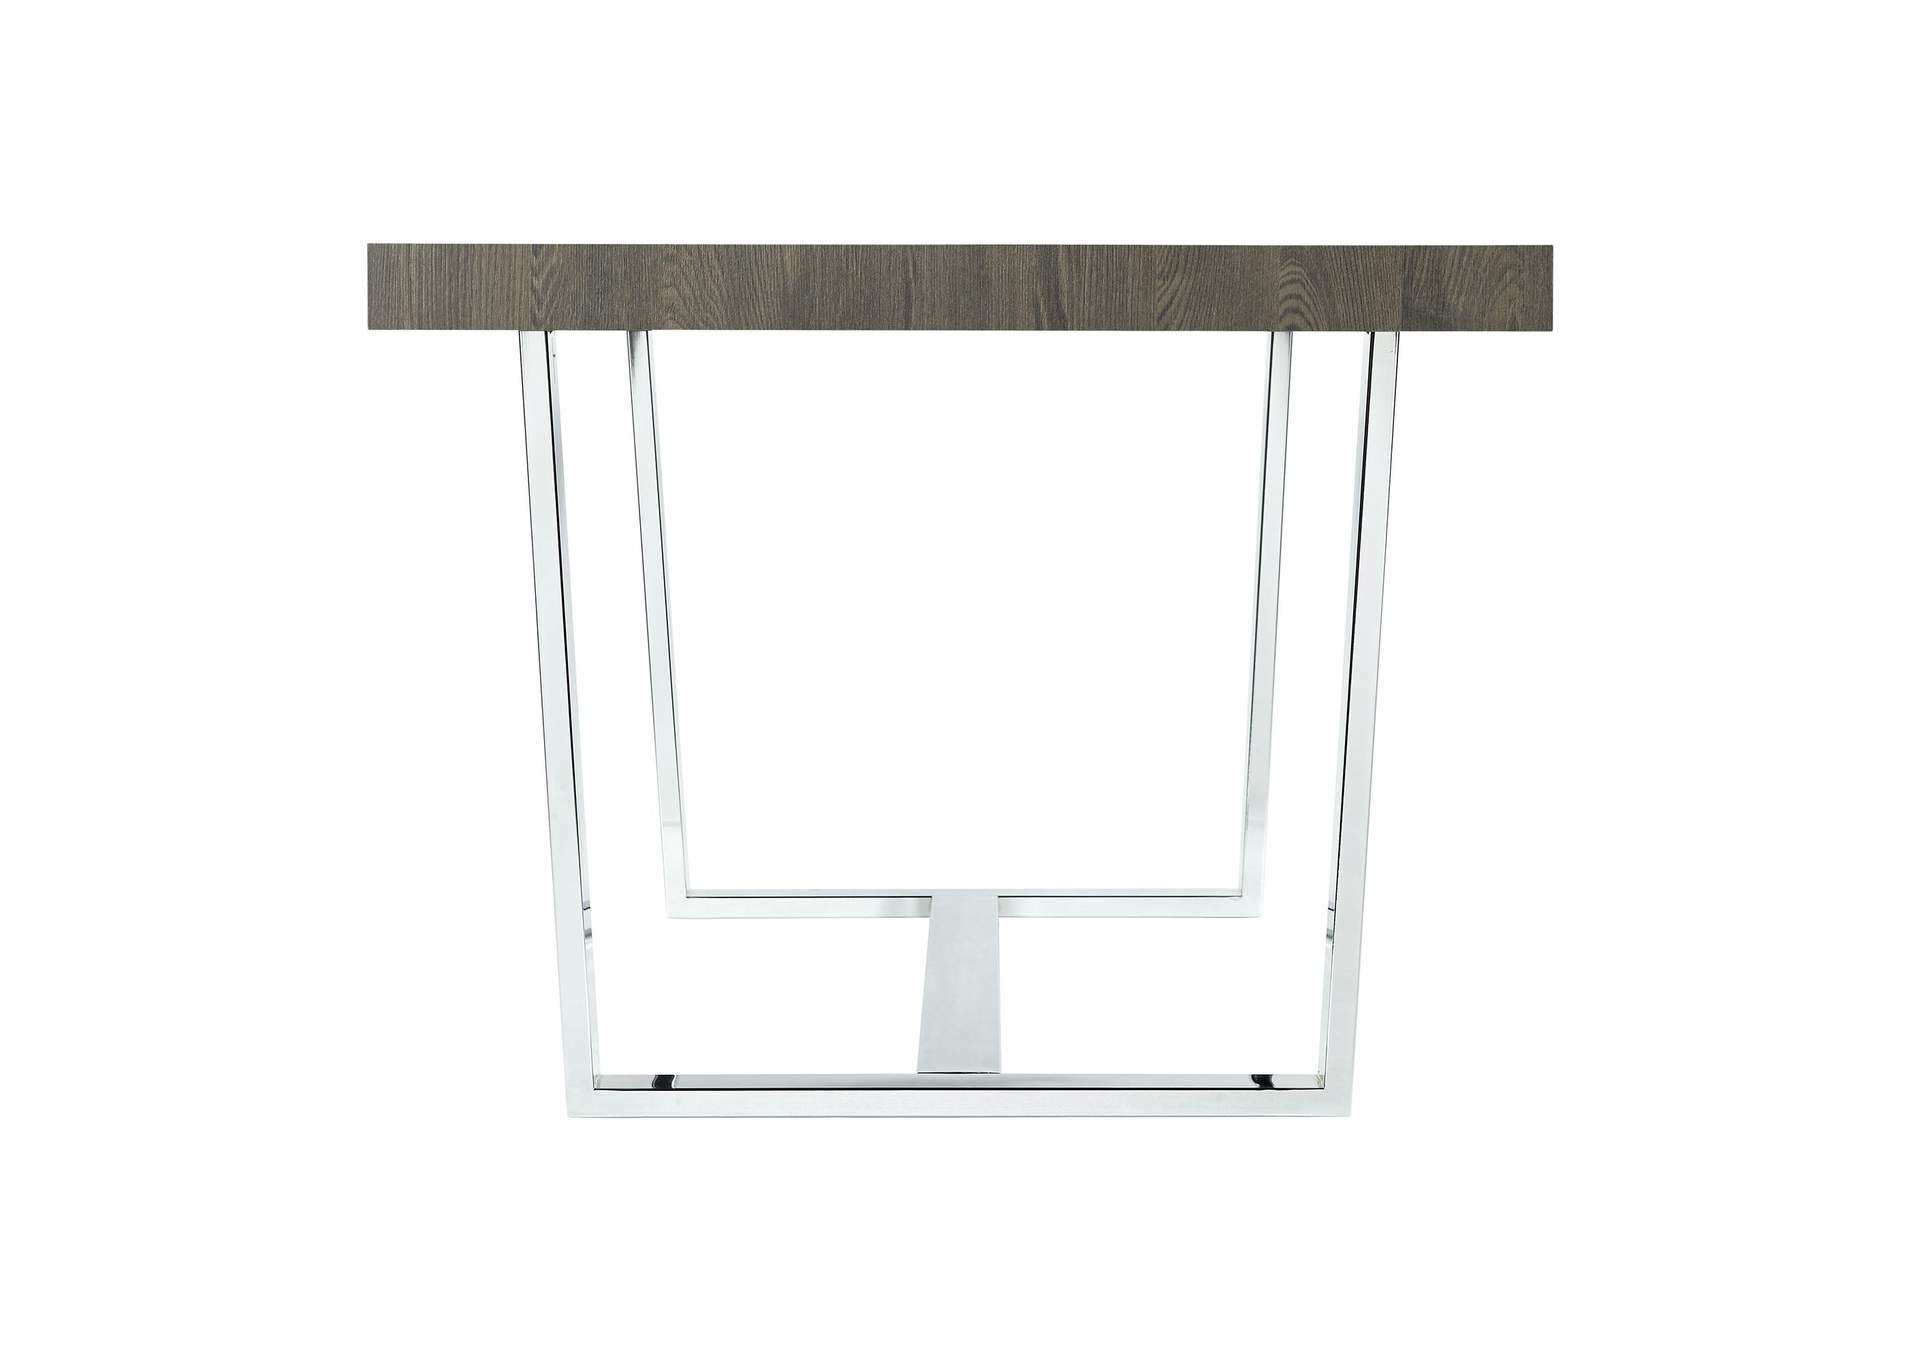 Nadia Dining Table,Elements